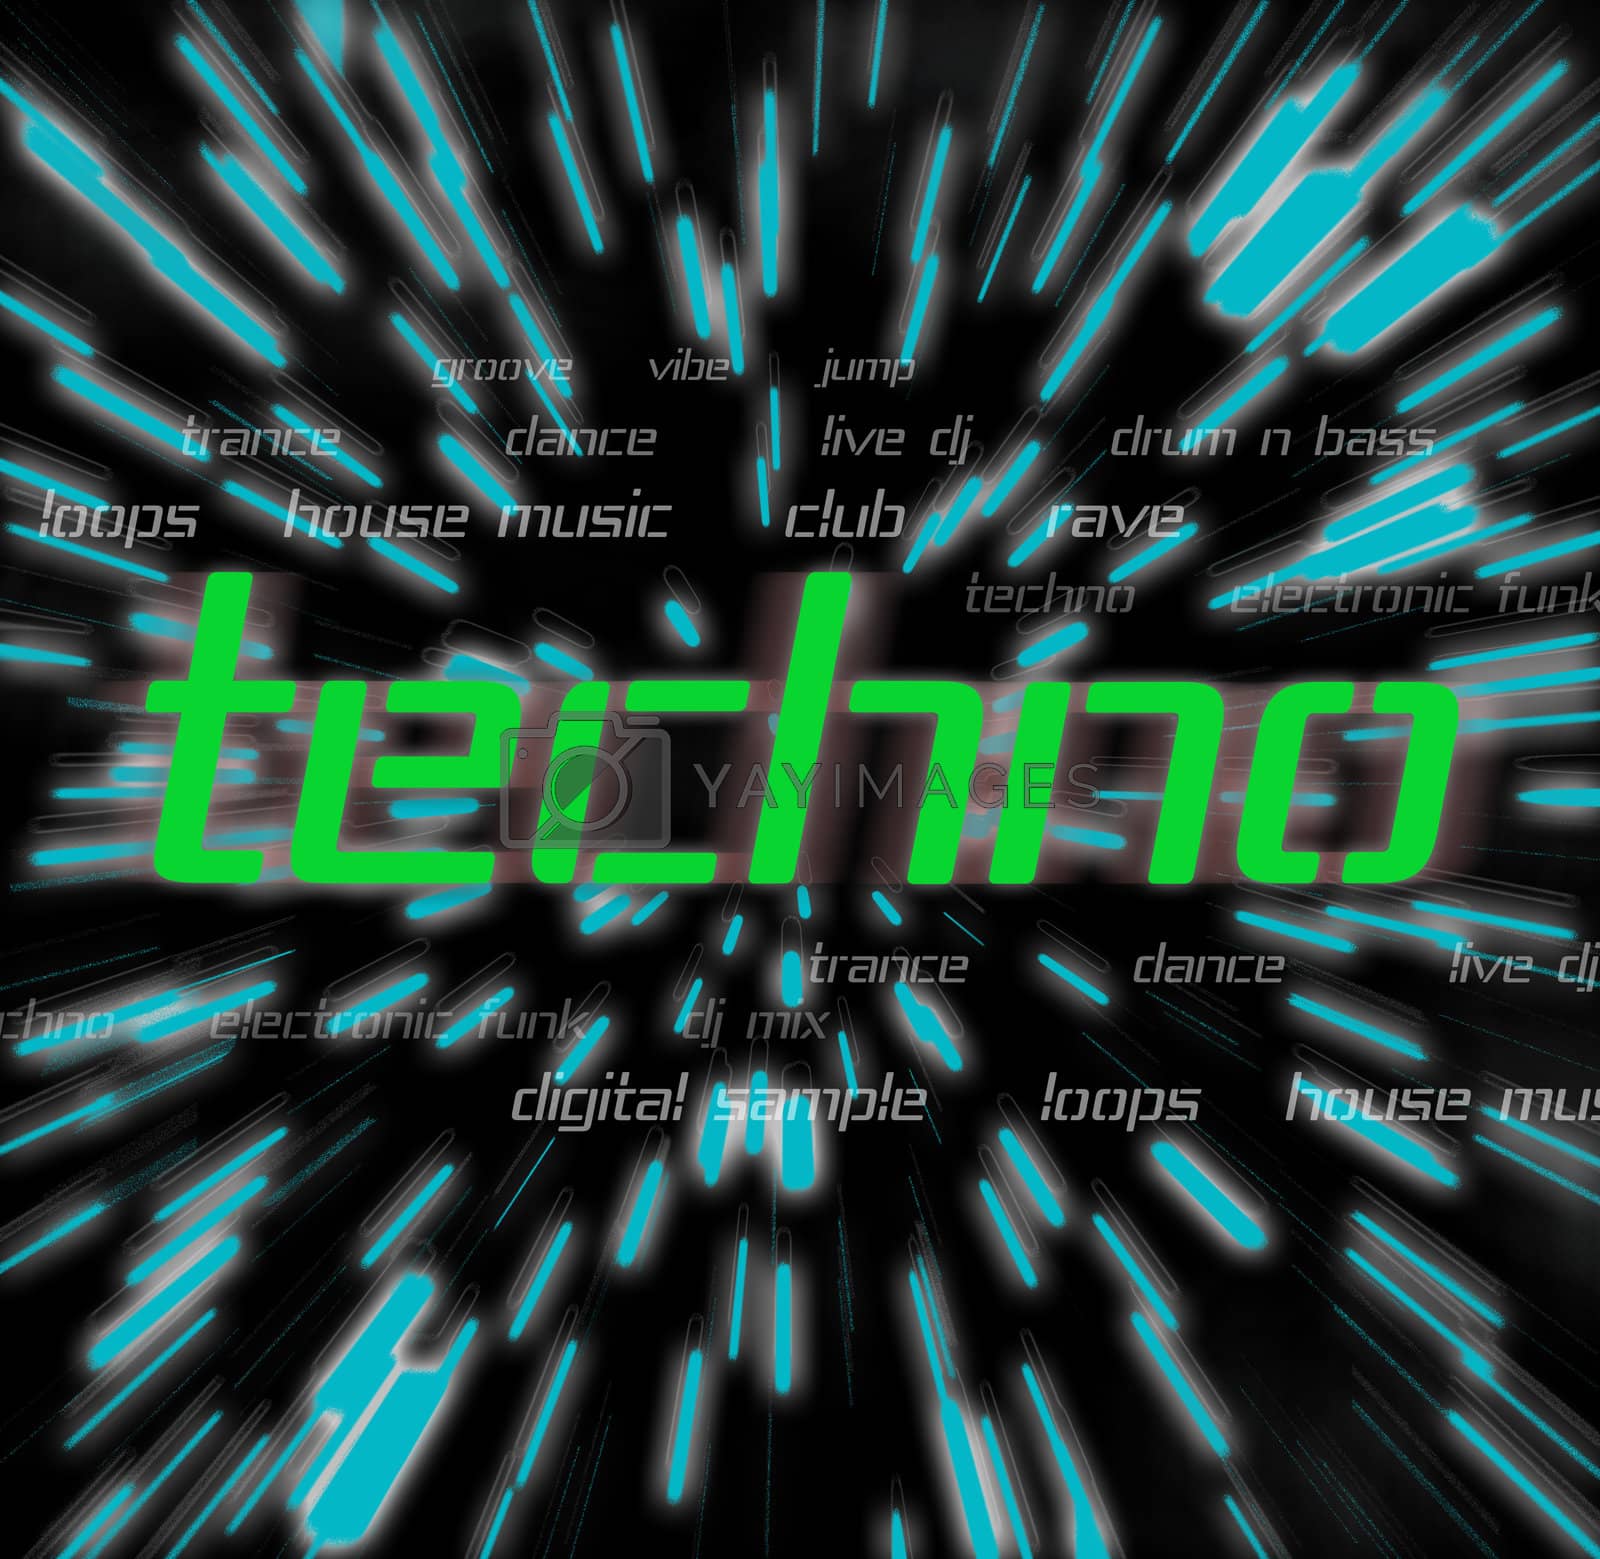 Royalty free image of Techno Mix by graficallyminded